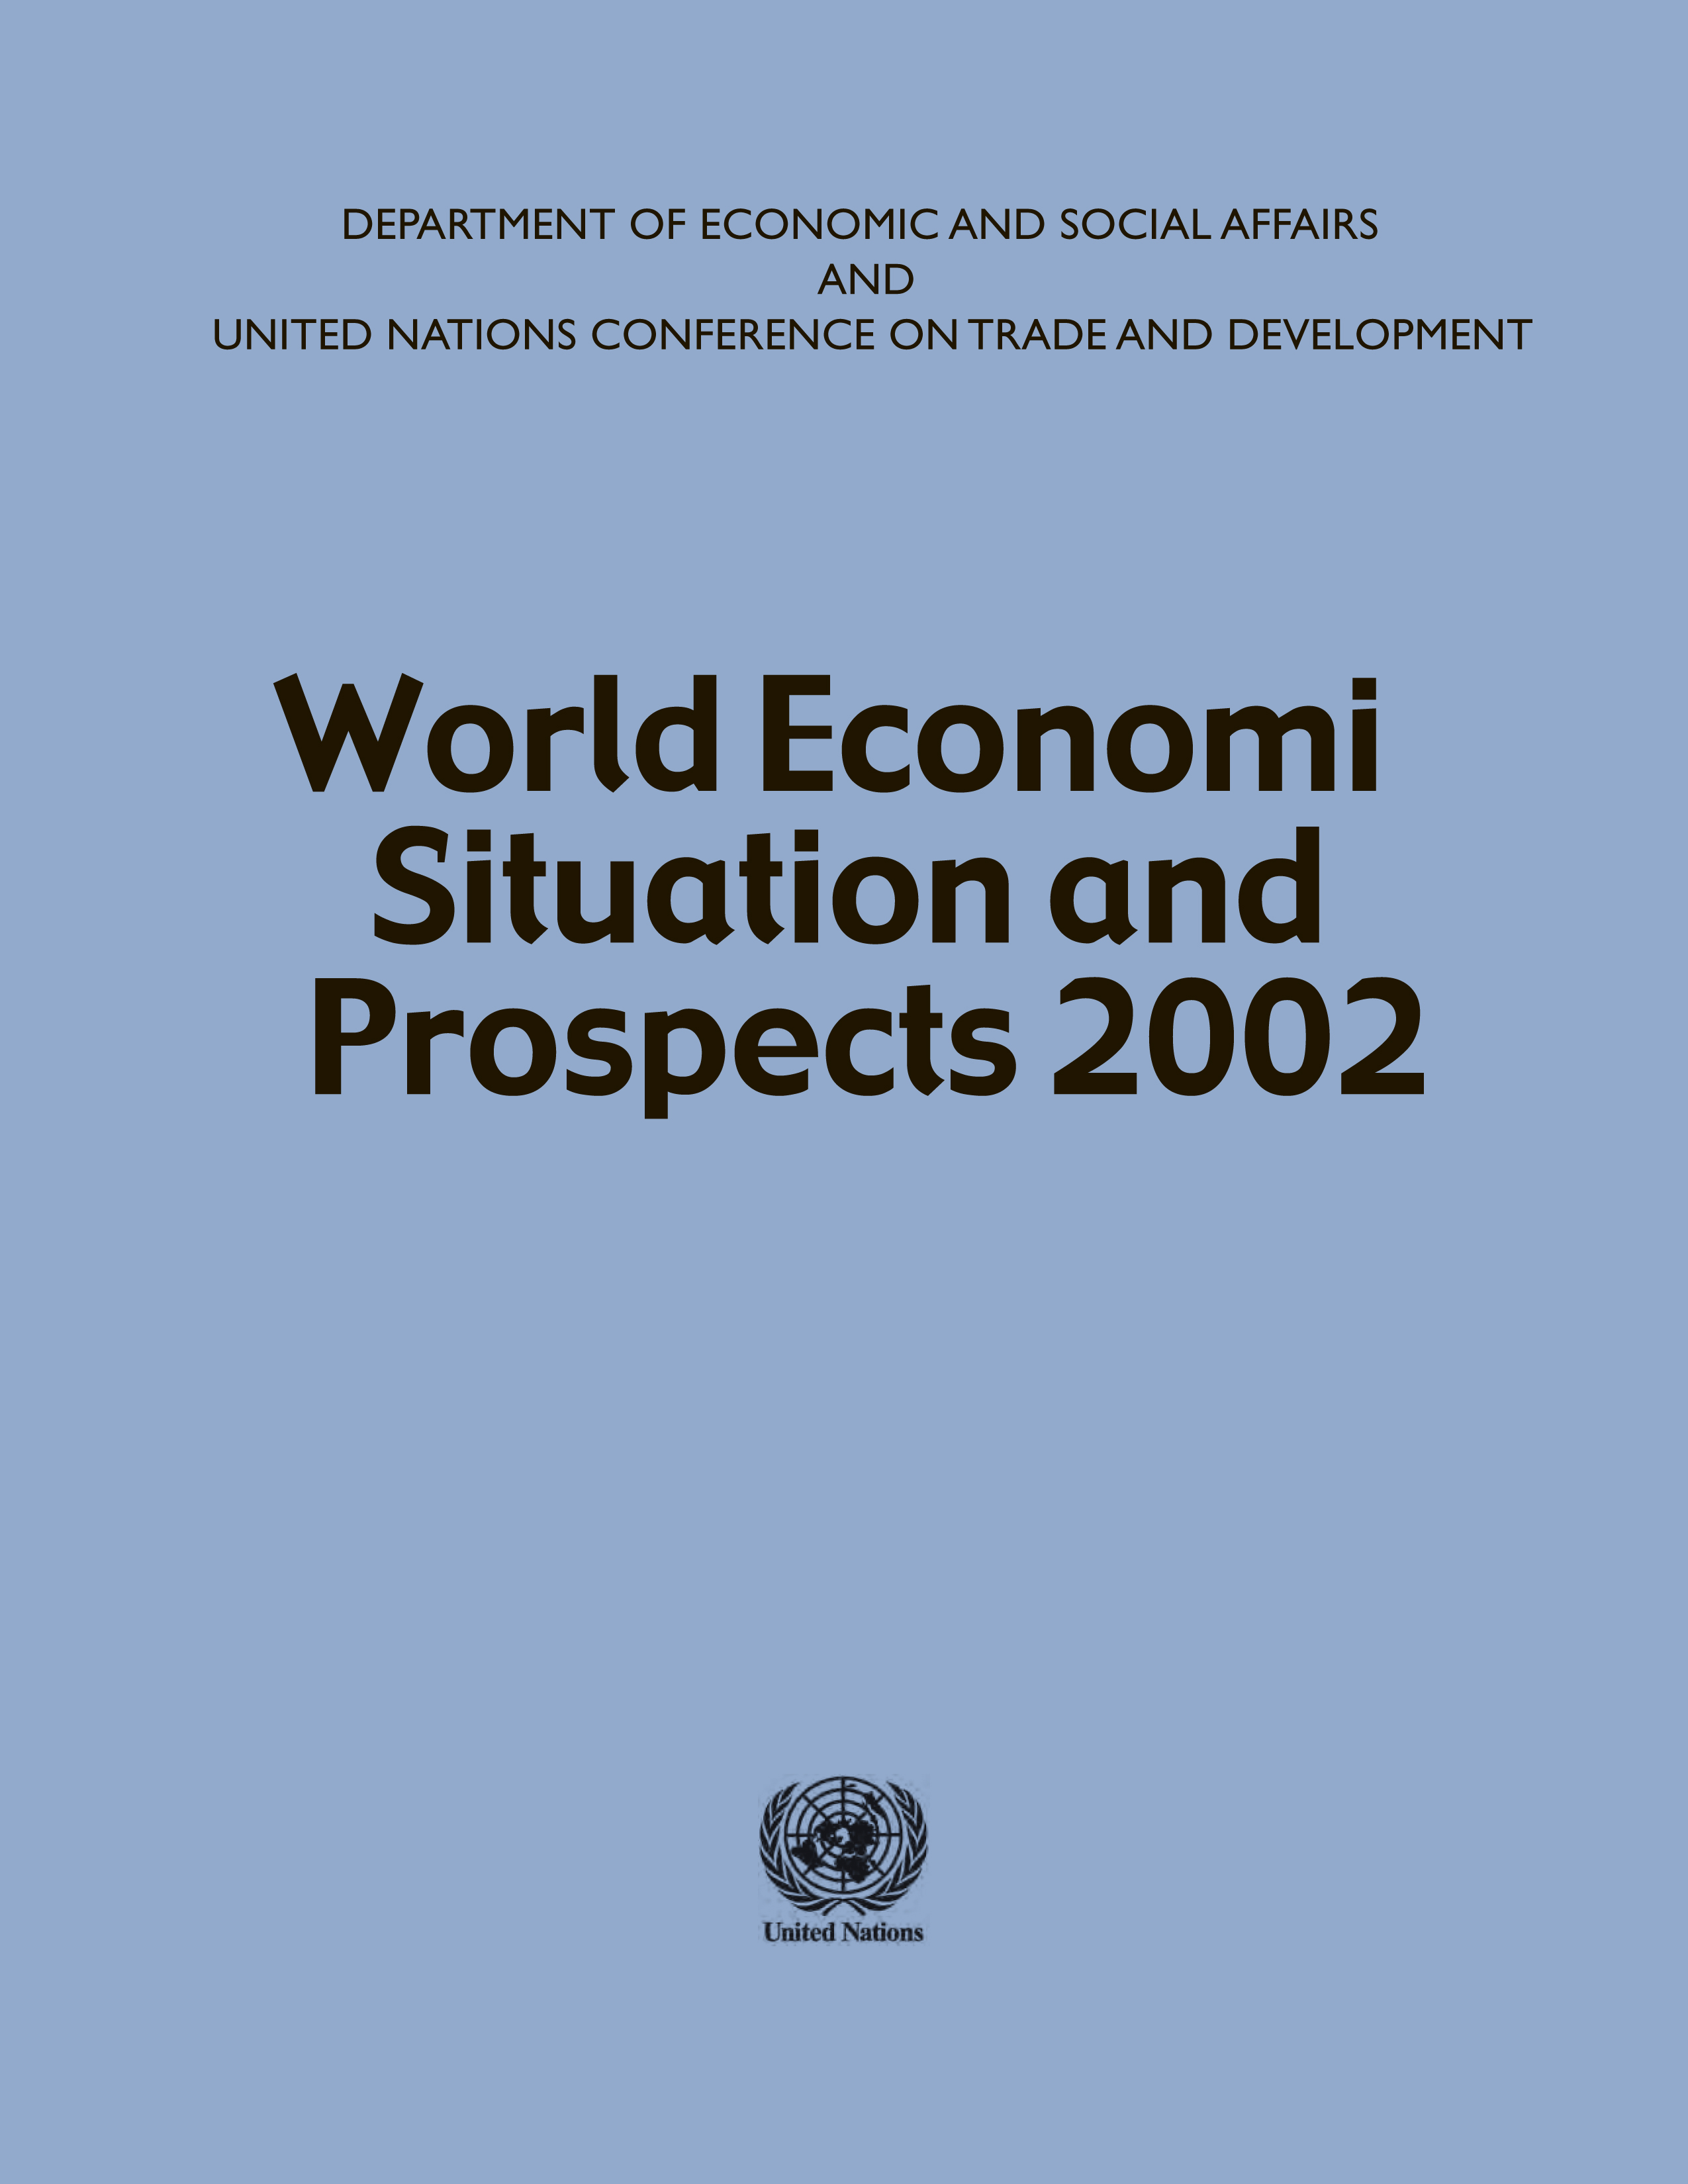 image of World Economic Situation and Prospects 2002